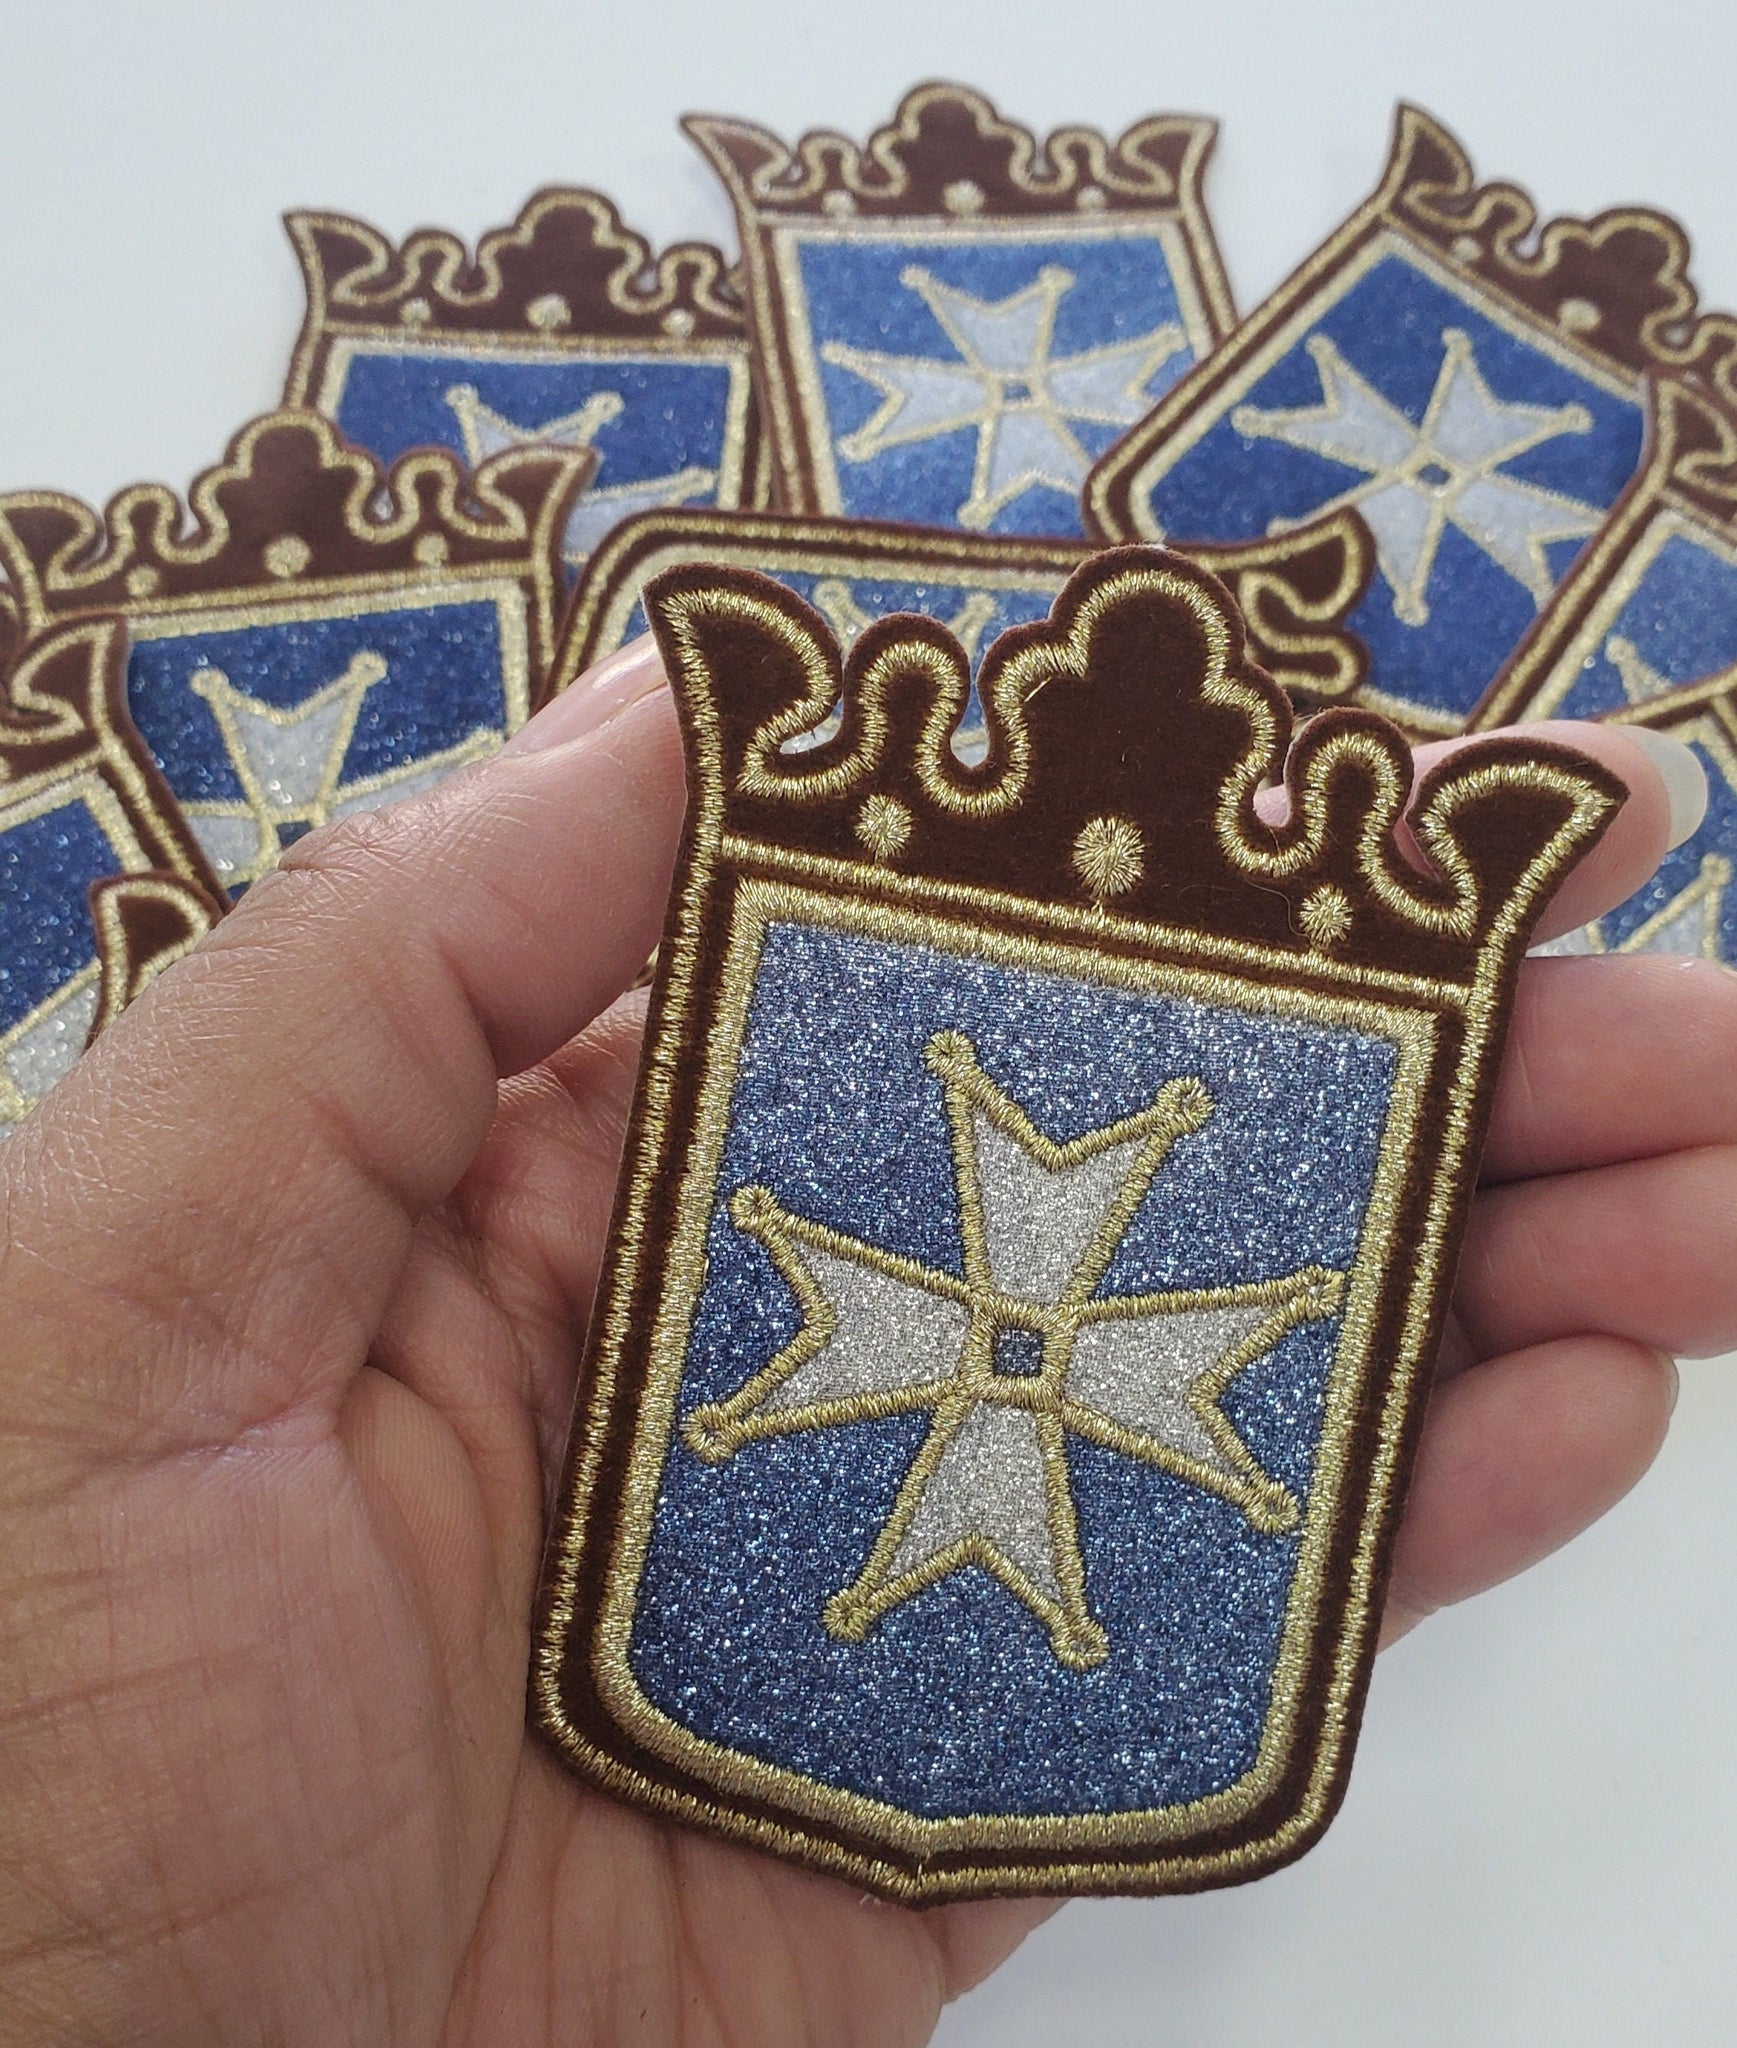 Royal, 1-pc "Medieval Cross" Gold, Glitter, & Blue Metallic Royalty Crest w/Brown Velvet, Small Emblem, Embroidered Patch, Iron-On, Size 3"